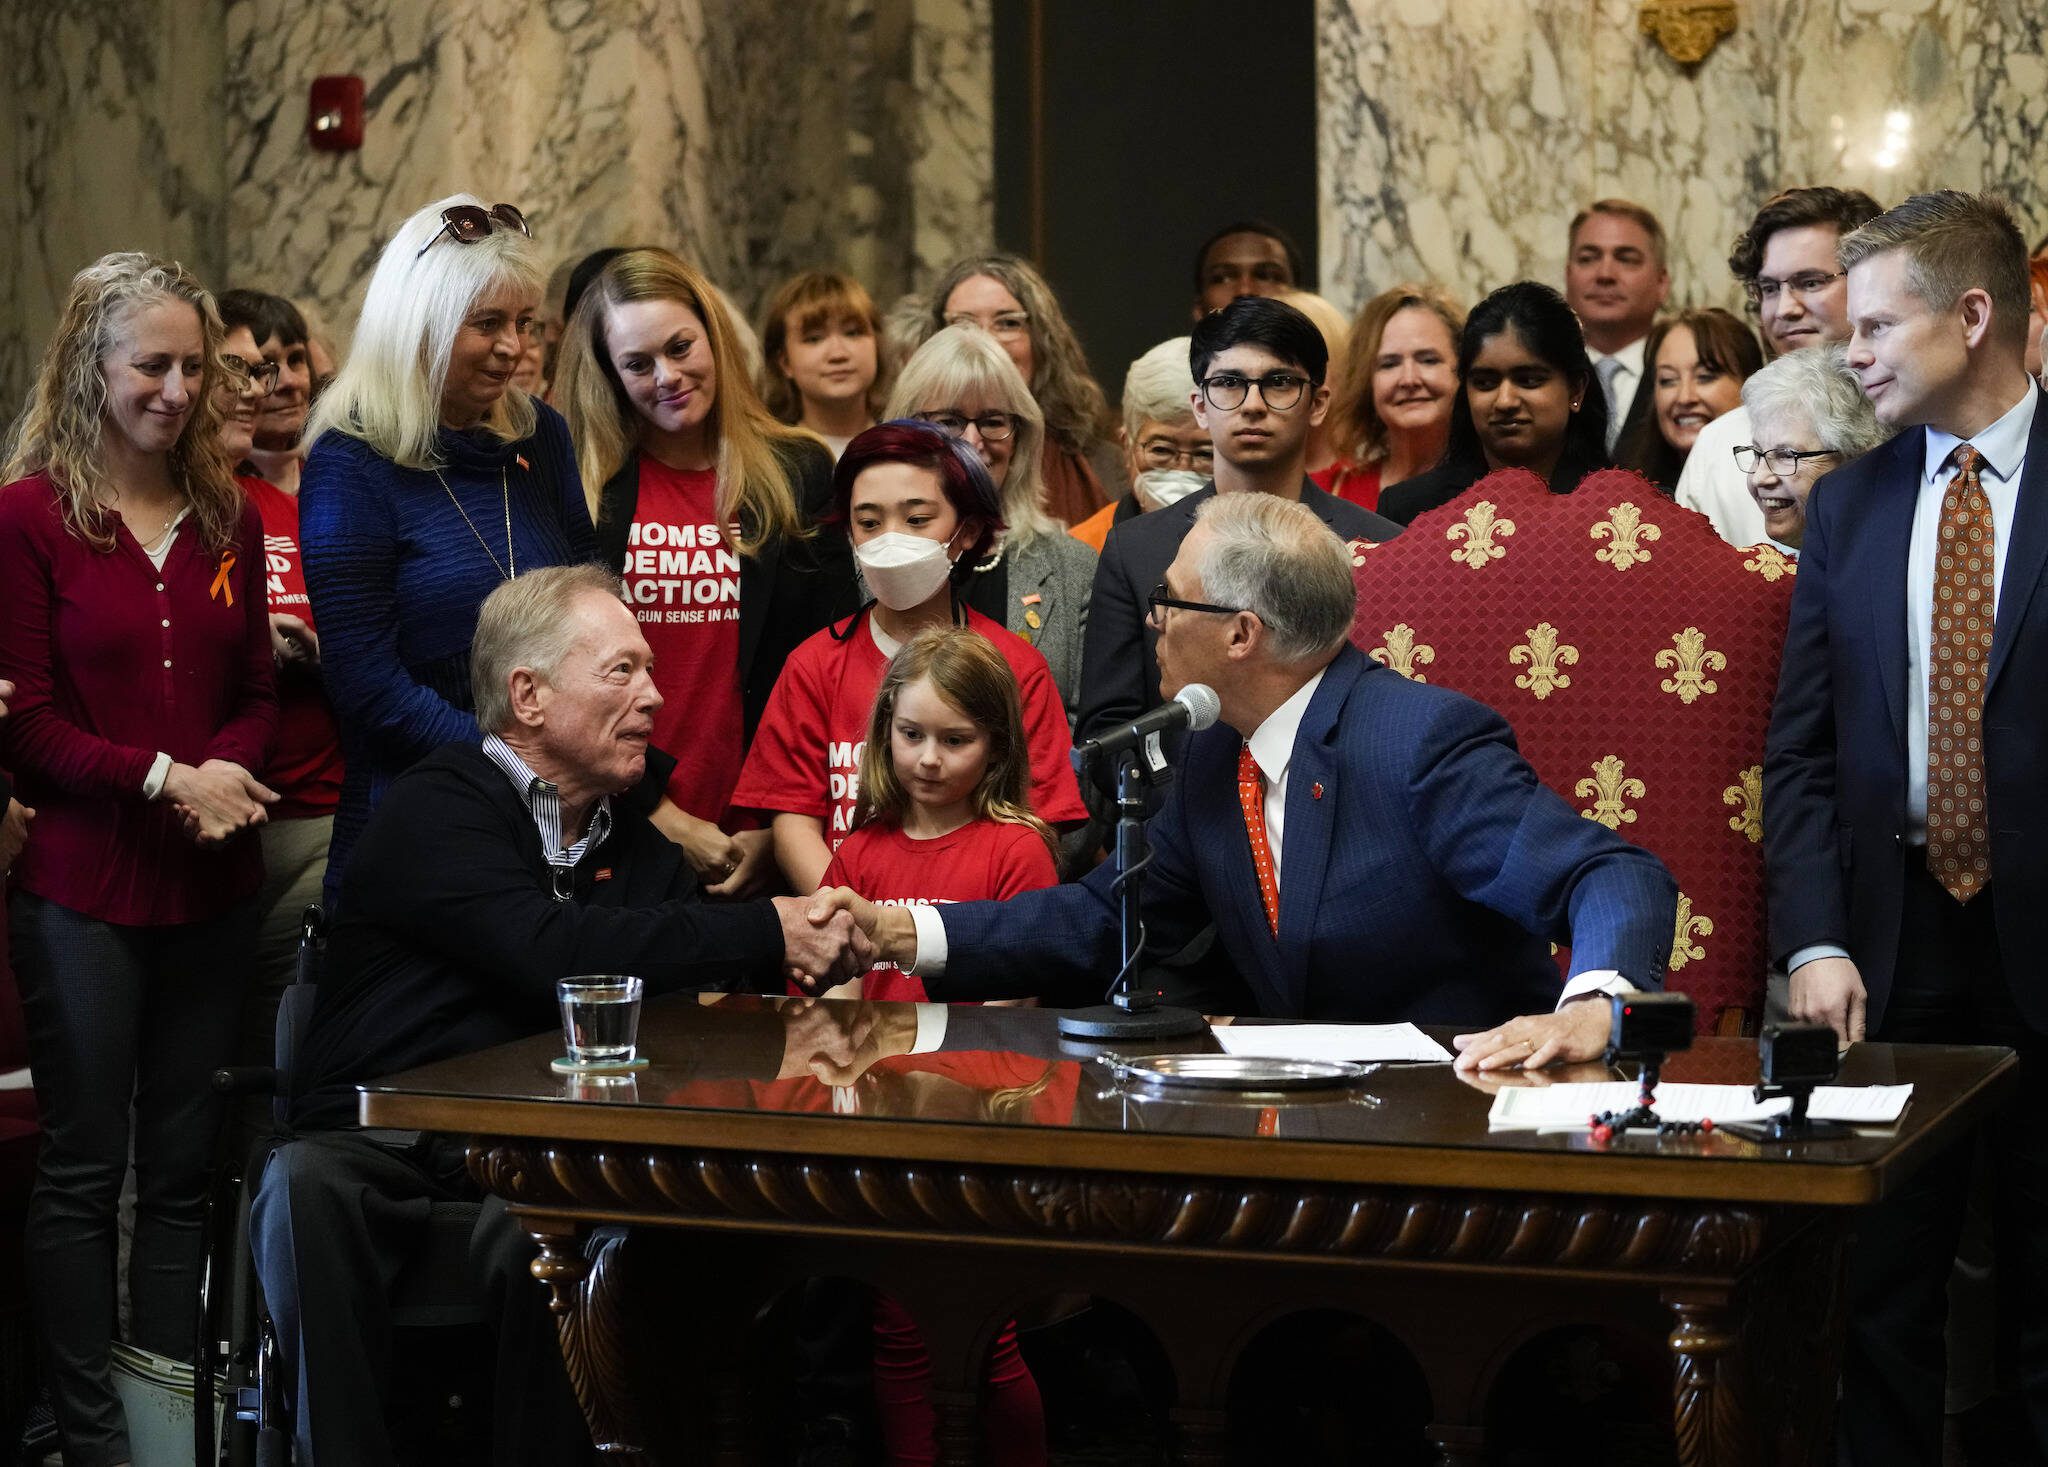 Washington Gov. Jay Inslee shakes the hands of Jim and Ann-Marie Parsons, in blue, whose daughter Carrie was killed in the 2017 Las Vegas shooting, after Inslee signed Senate Bill 5078, which ensures that firearms manufacturers and sellers will face liability if they fail to adopt and implement reasonable controls to prevent sales to dangerous individuals, Tuesday, April 25, 2023, at the Capitol in Olympia, Wash. (AP Photo/Lindsey Wasson)